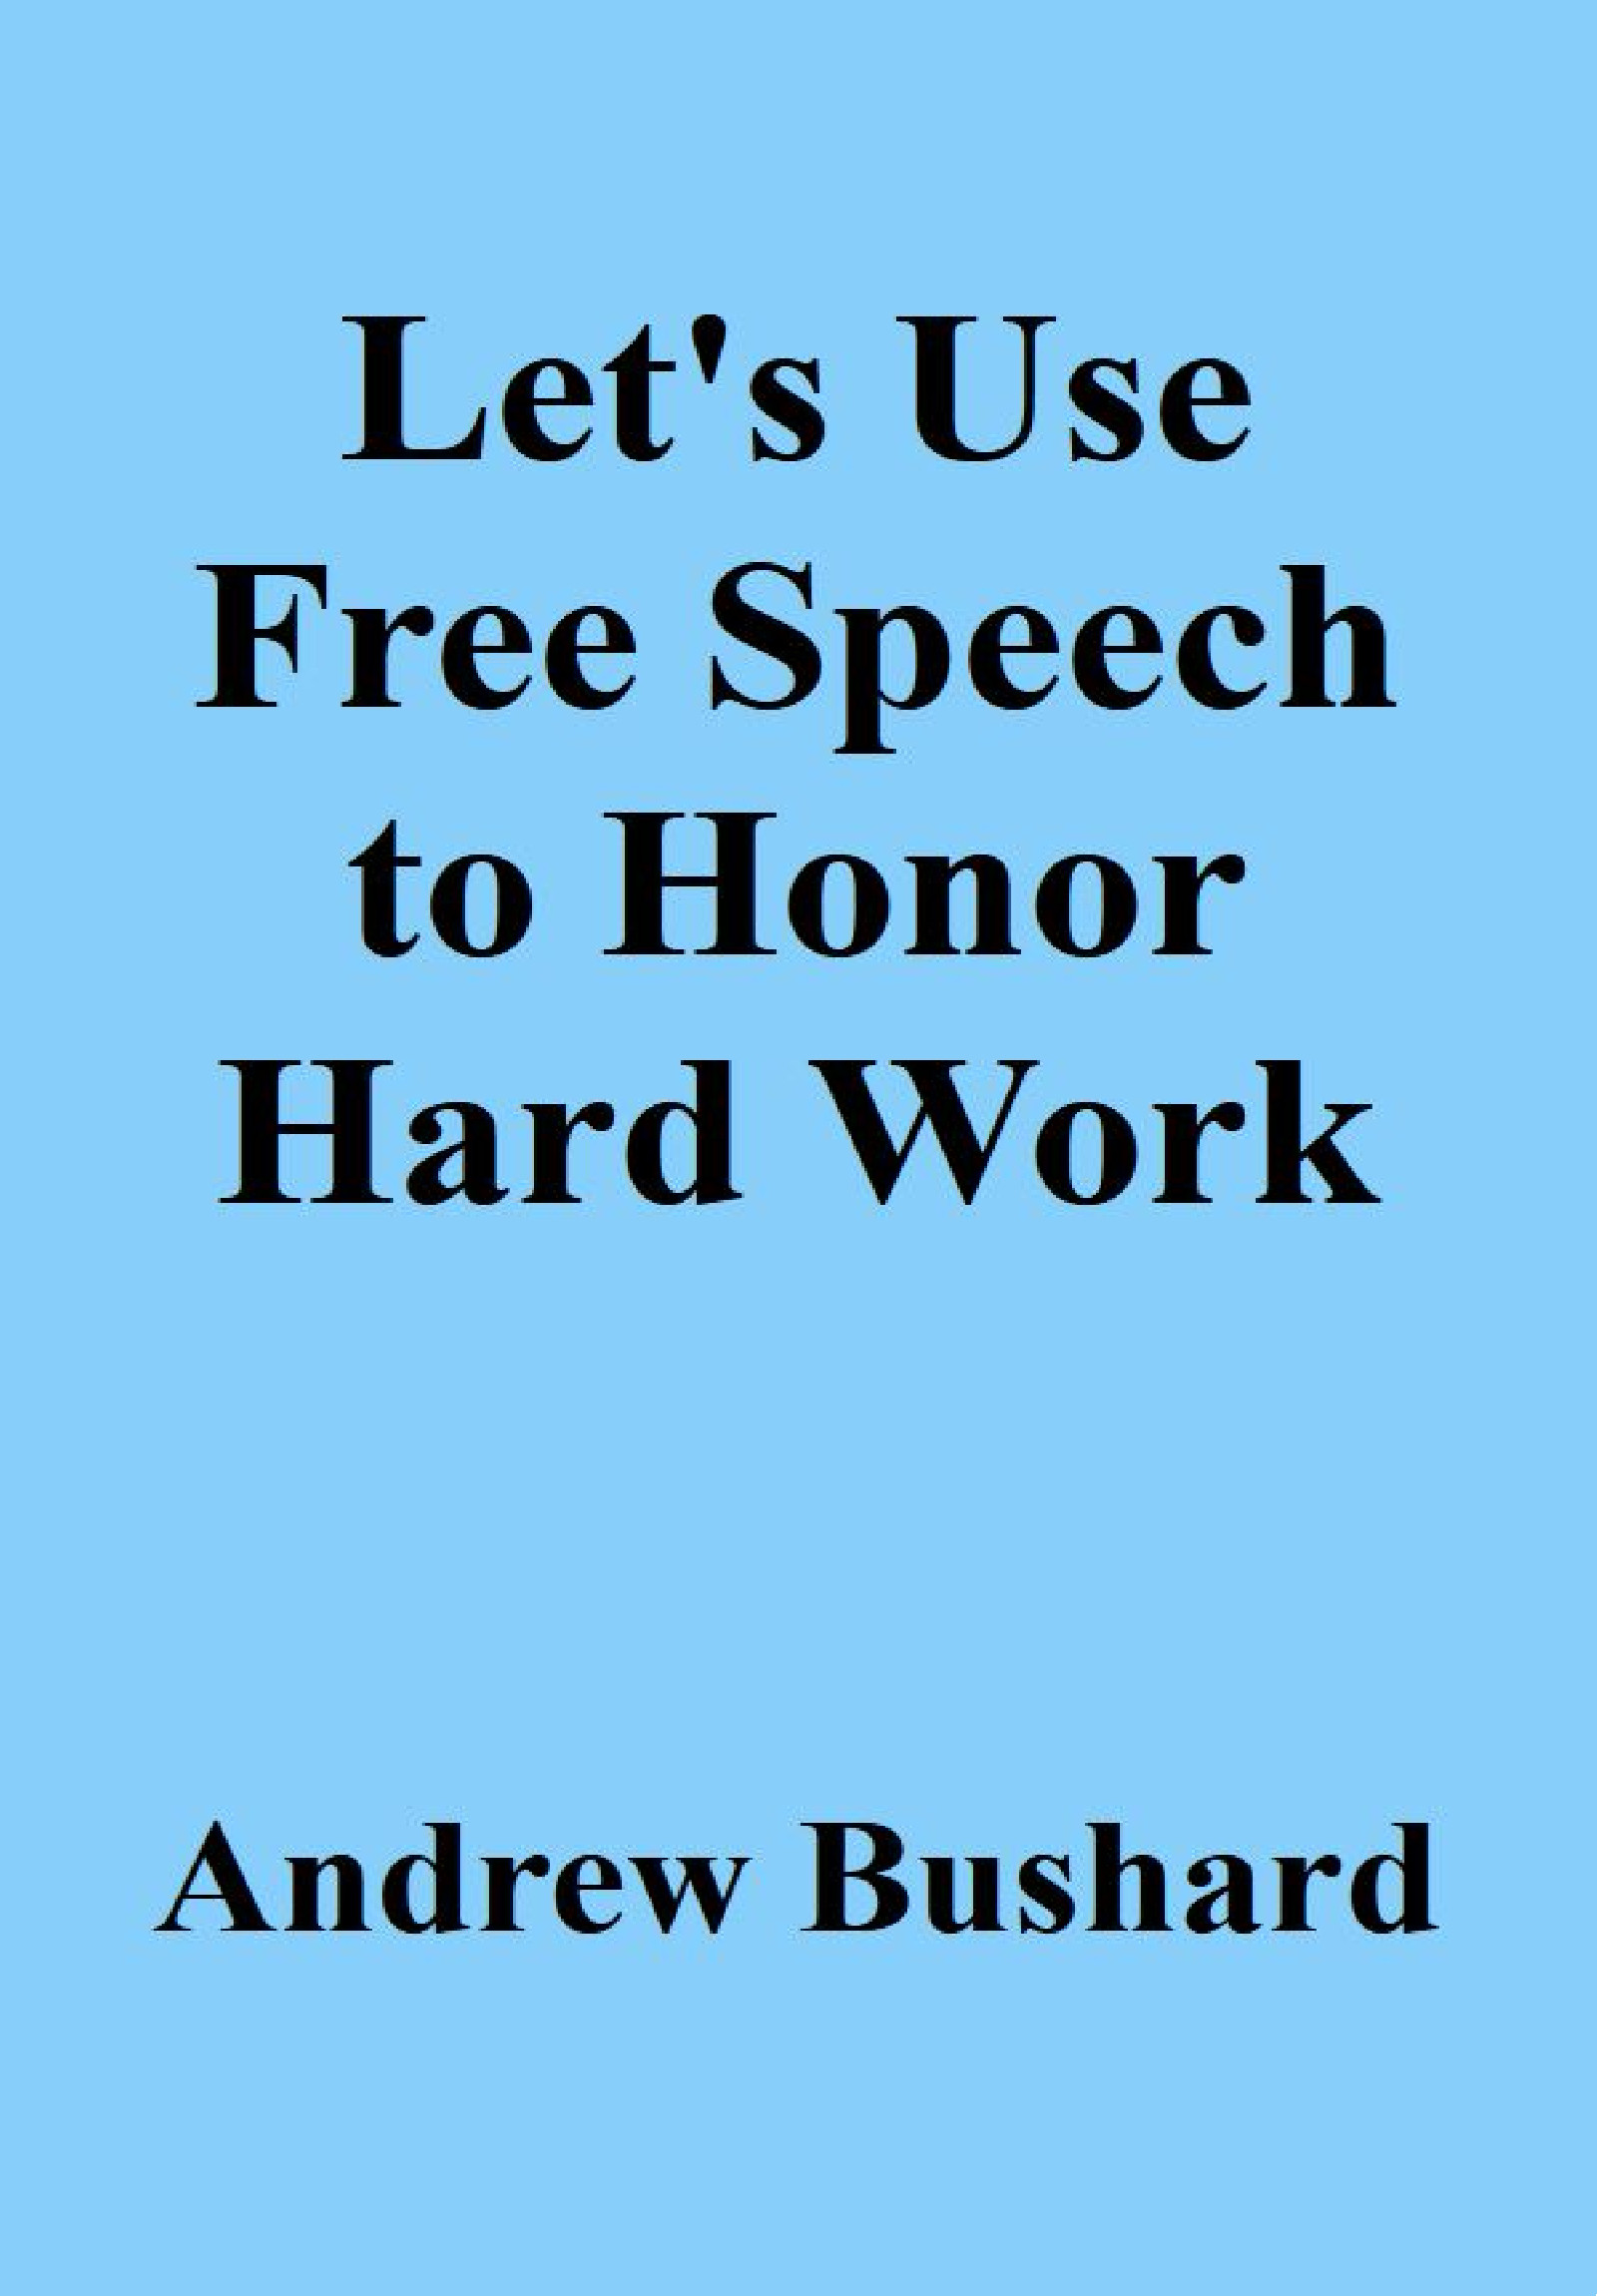 Let's Use Free Speech to Honor Hard Work's featured image